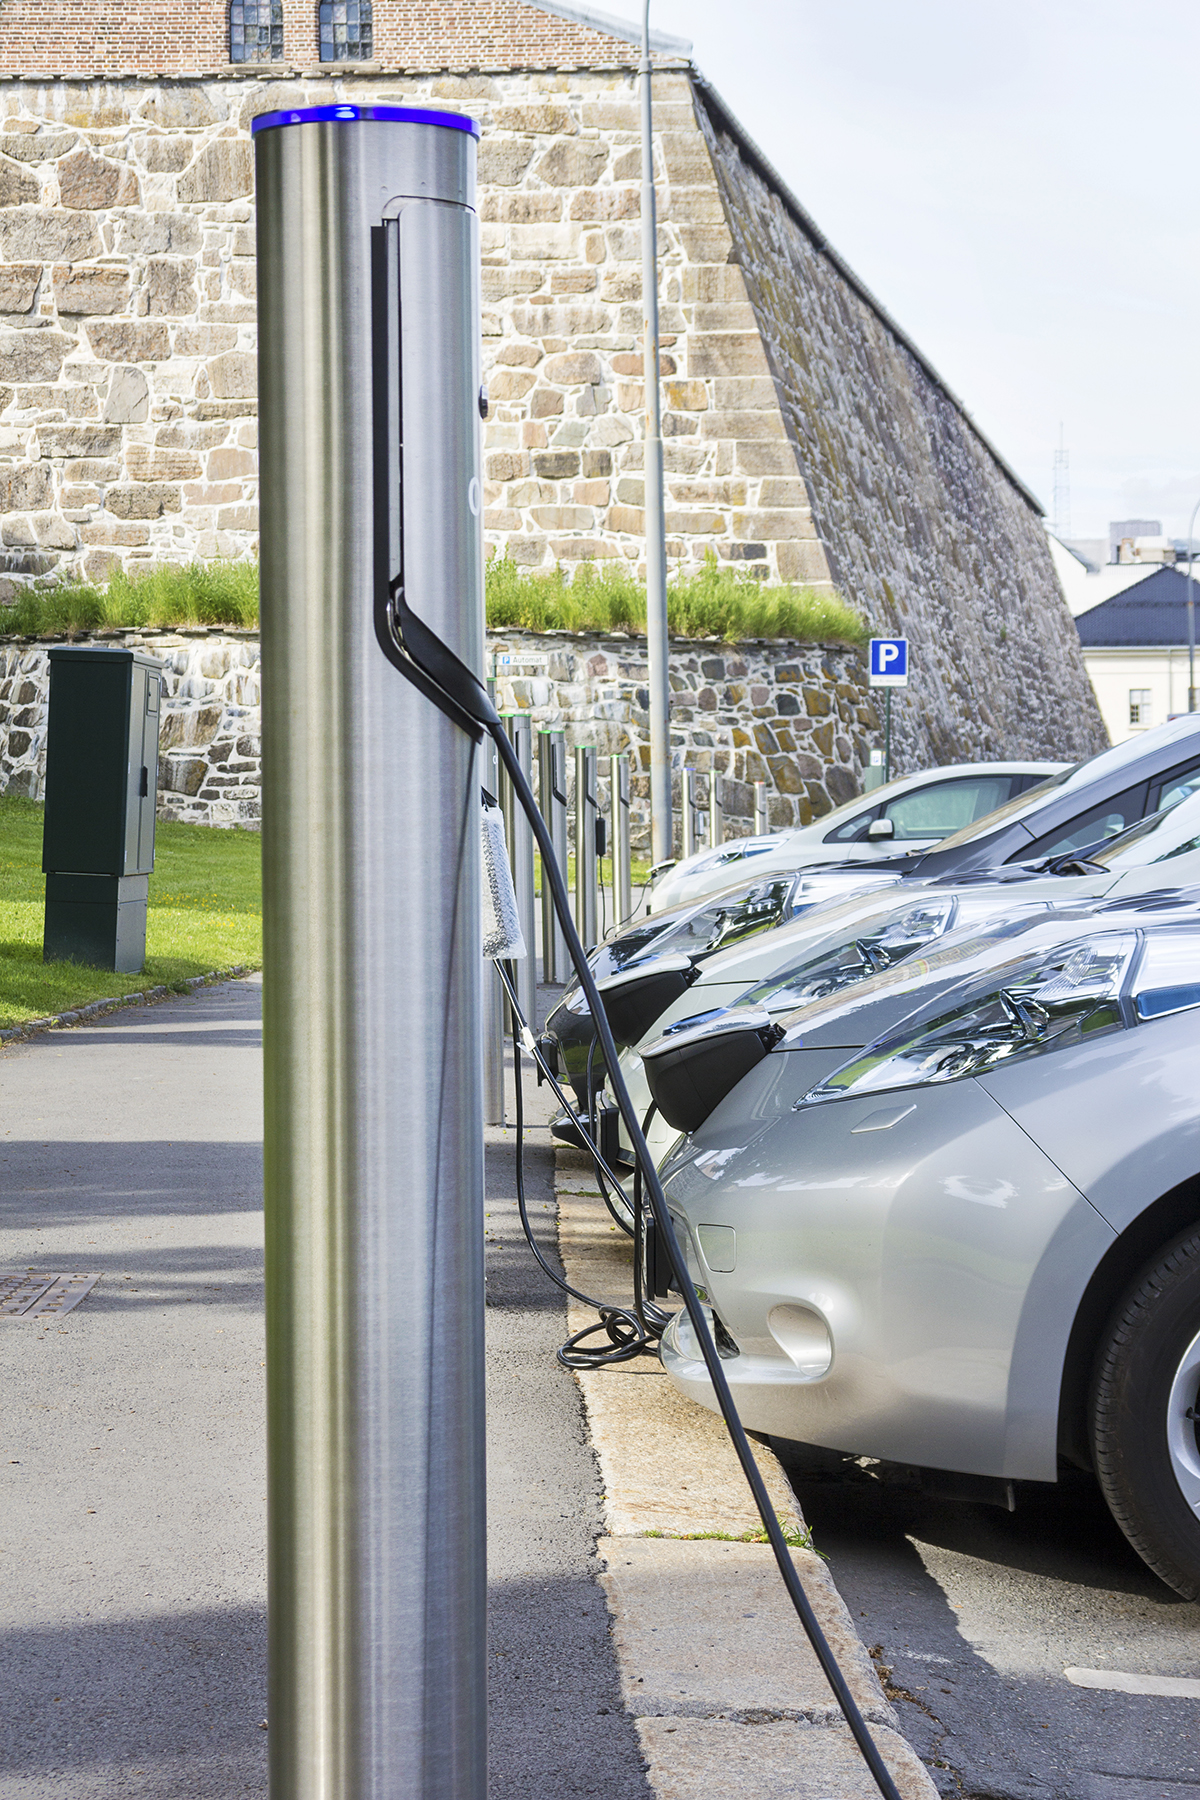 A row of electric vehicles connected to public re-charging stations in a scenic car park.